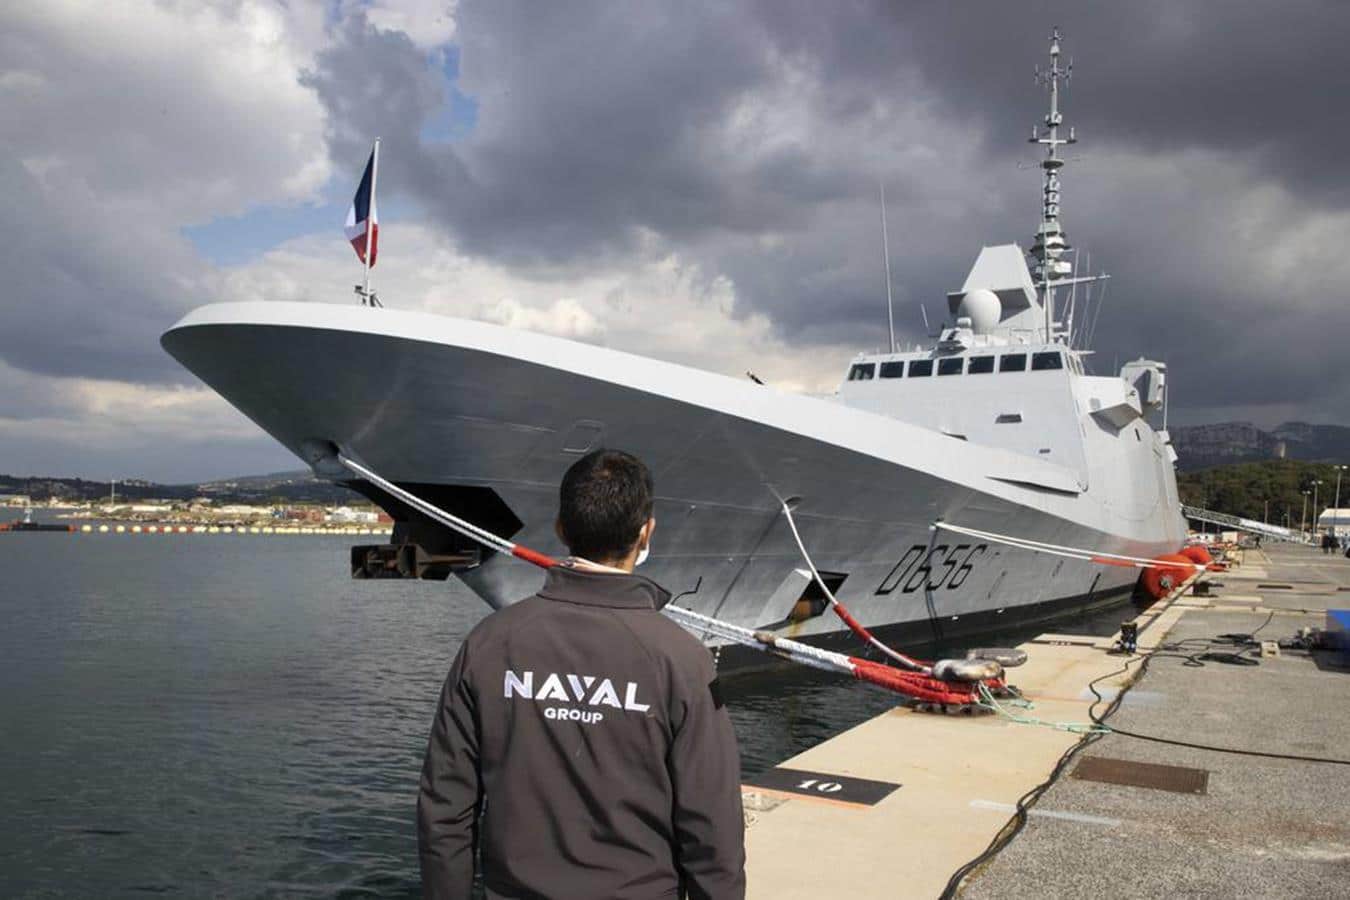 Lorraine Sea Trials.  This is the last French multi-role FREMM frigate